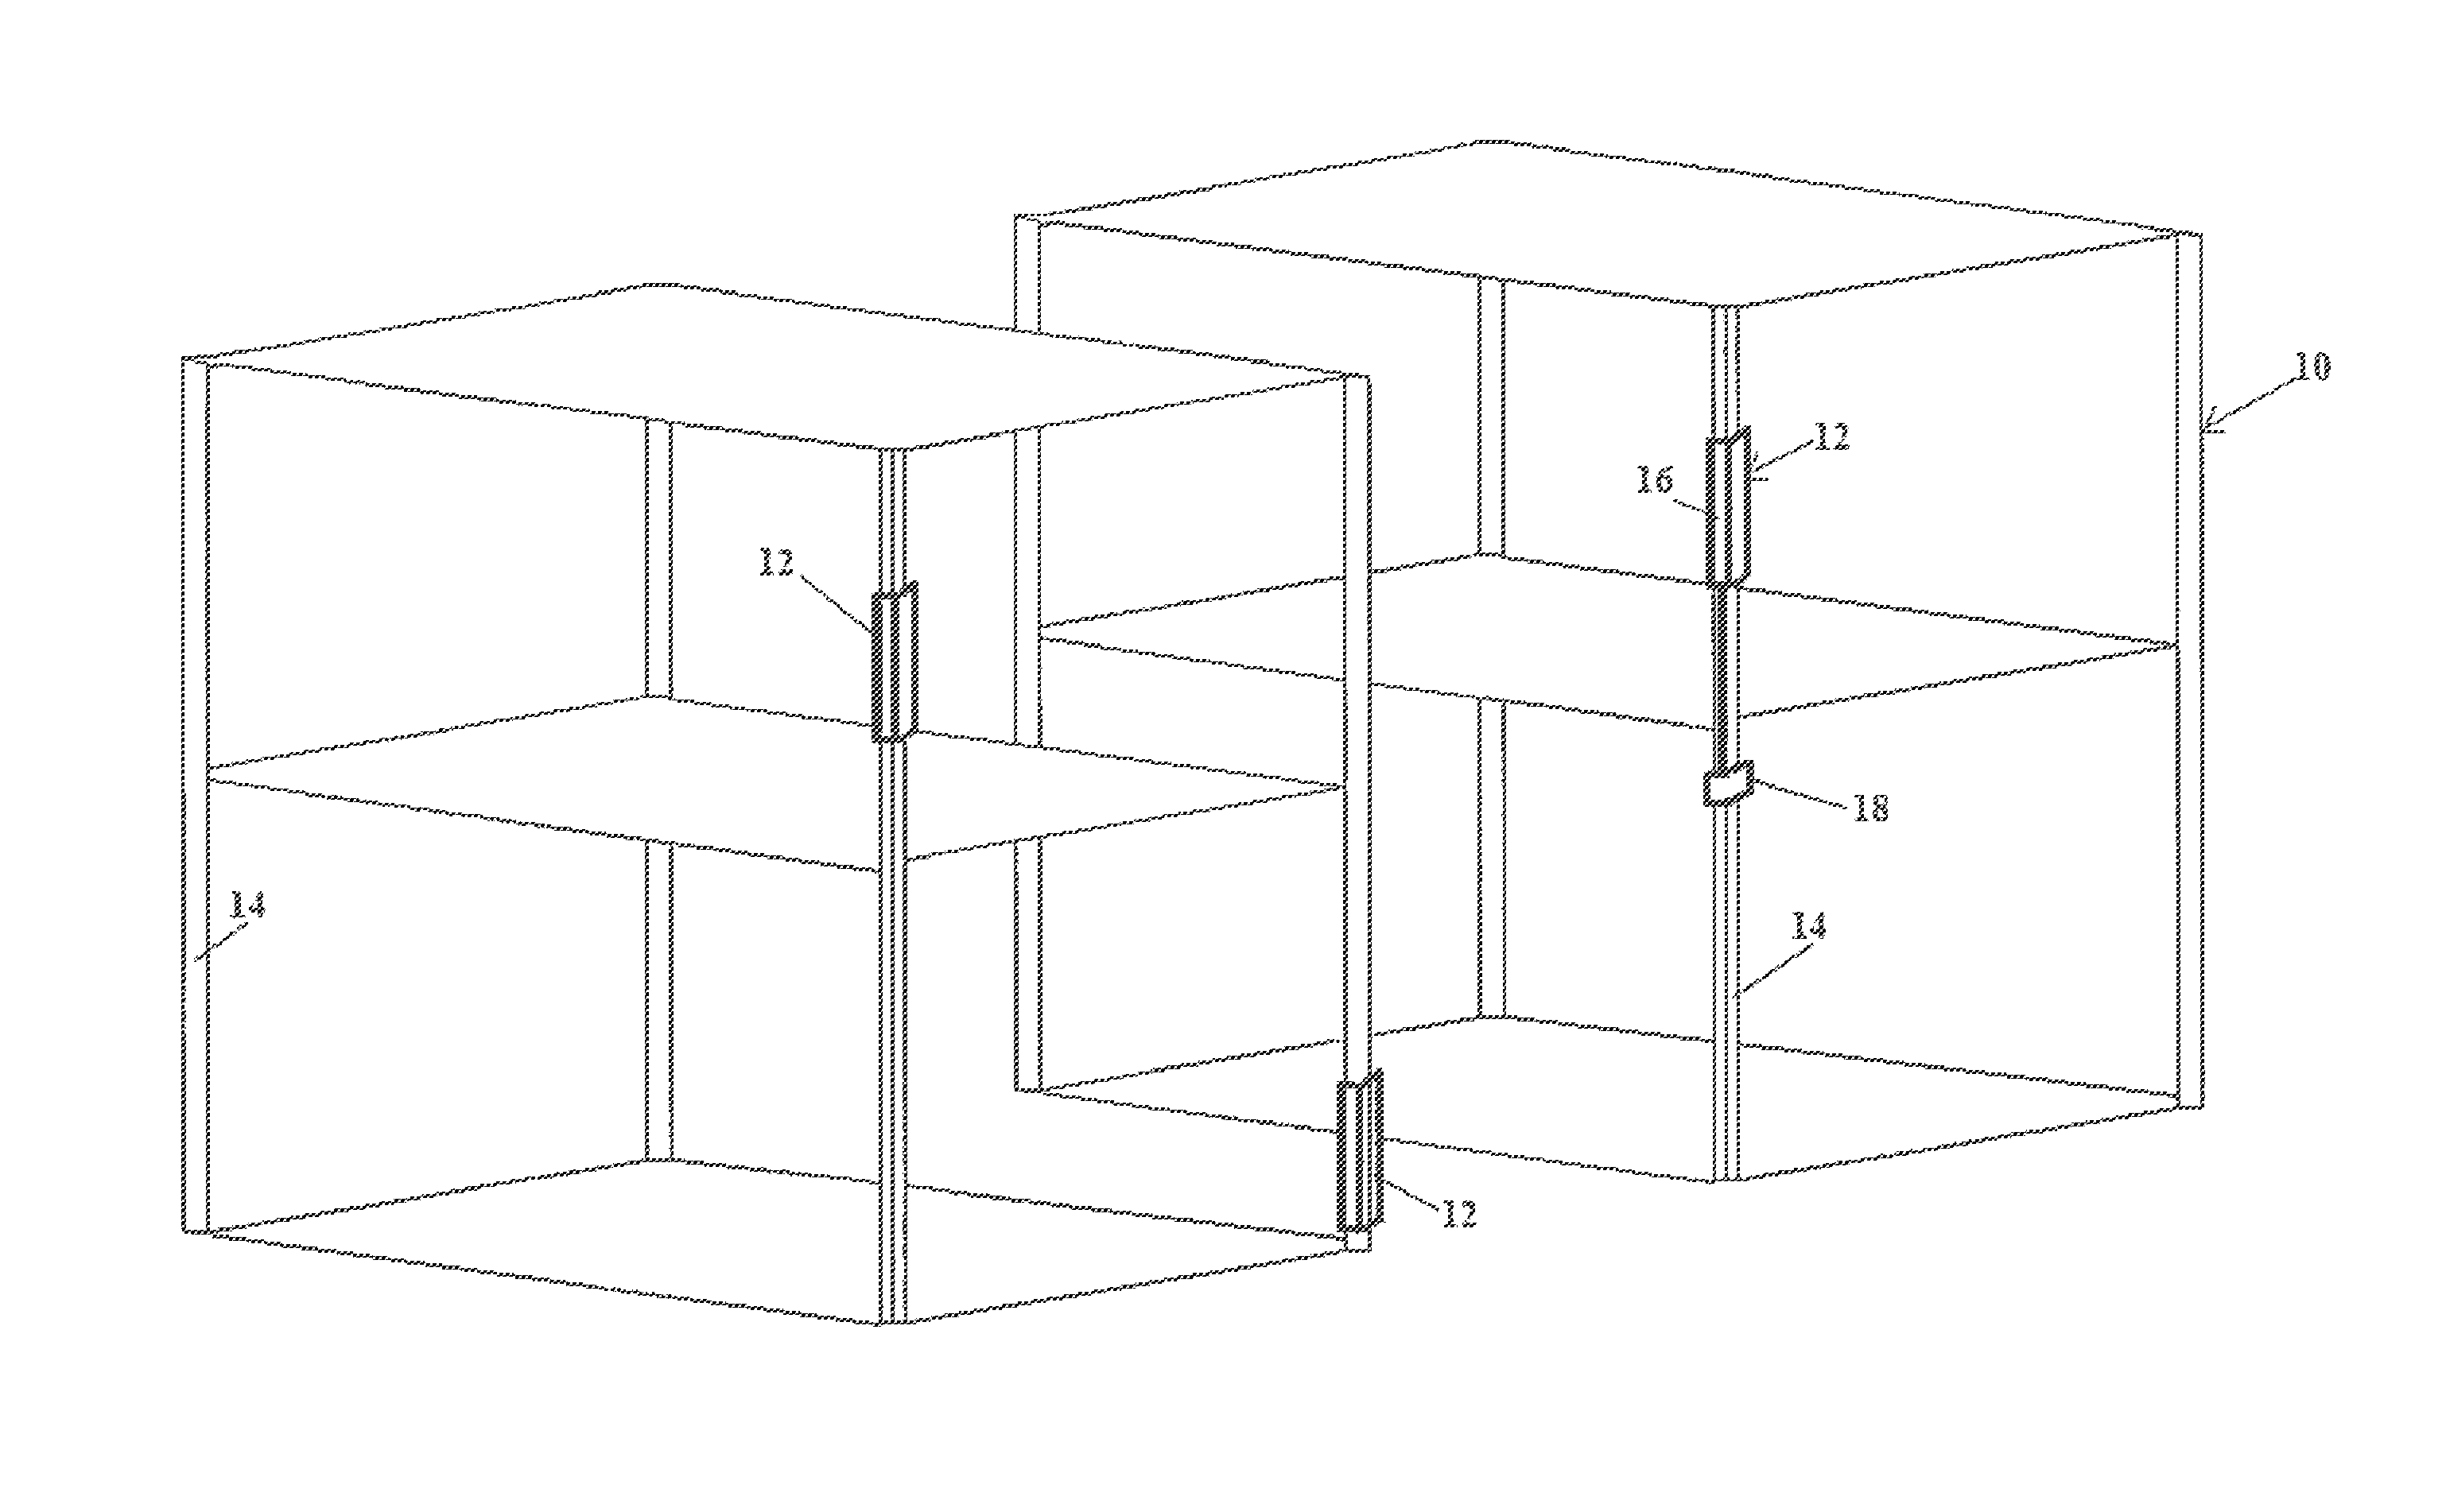 Collision sensor assembly for a stationary structure